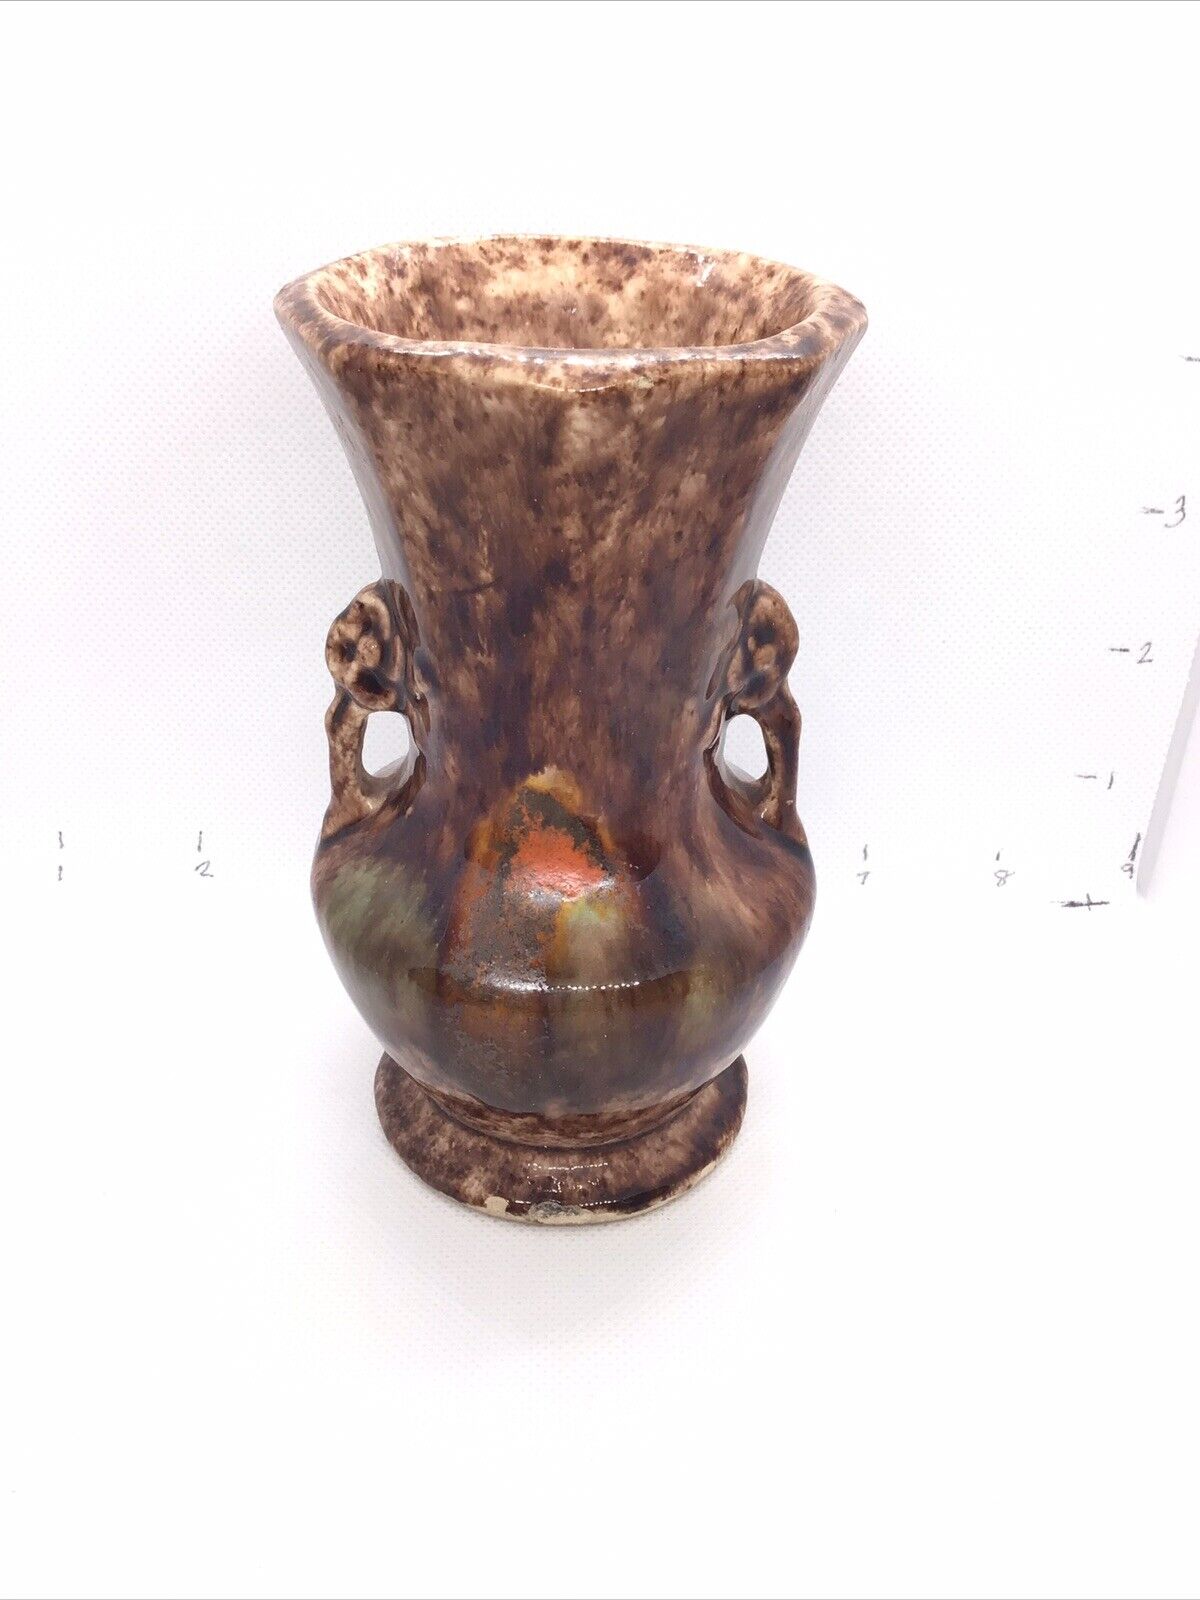 Vintage Ceramic Pottery Vase Brown Germany 5 Inches